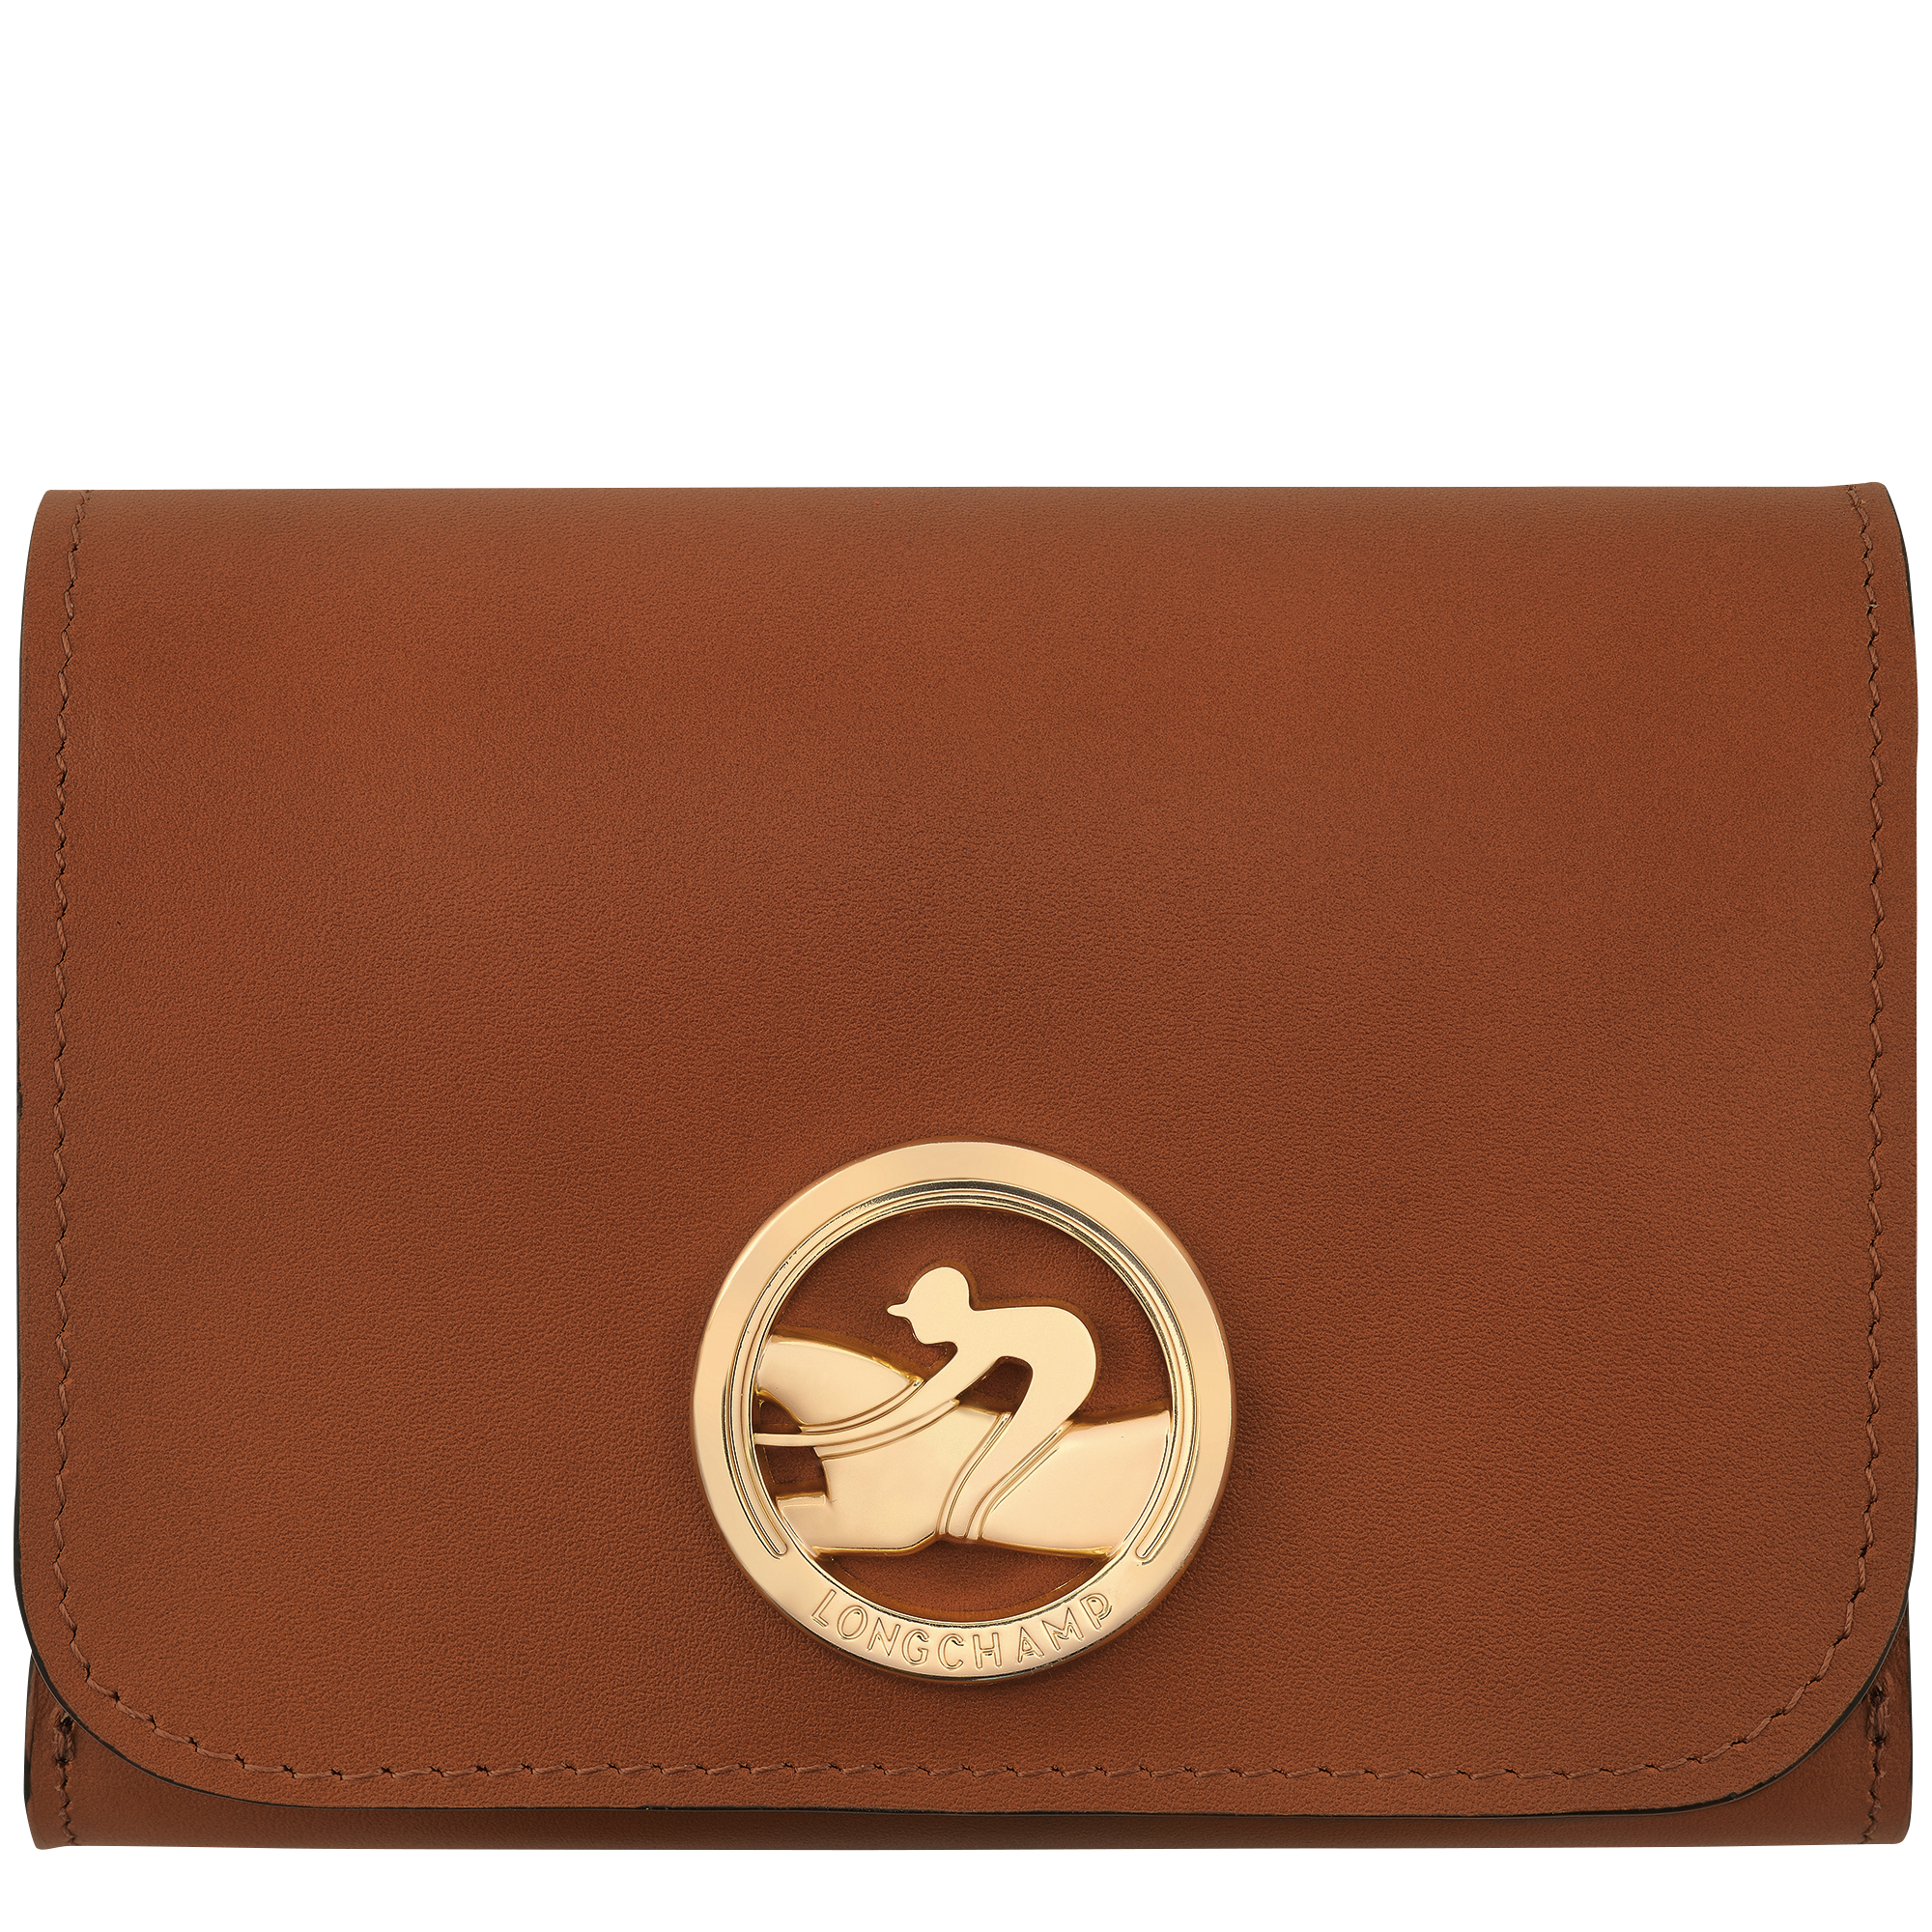 Galope Patent Leather Mini Wallet for Women Brown